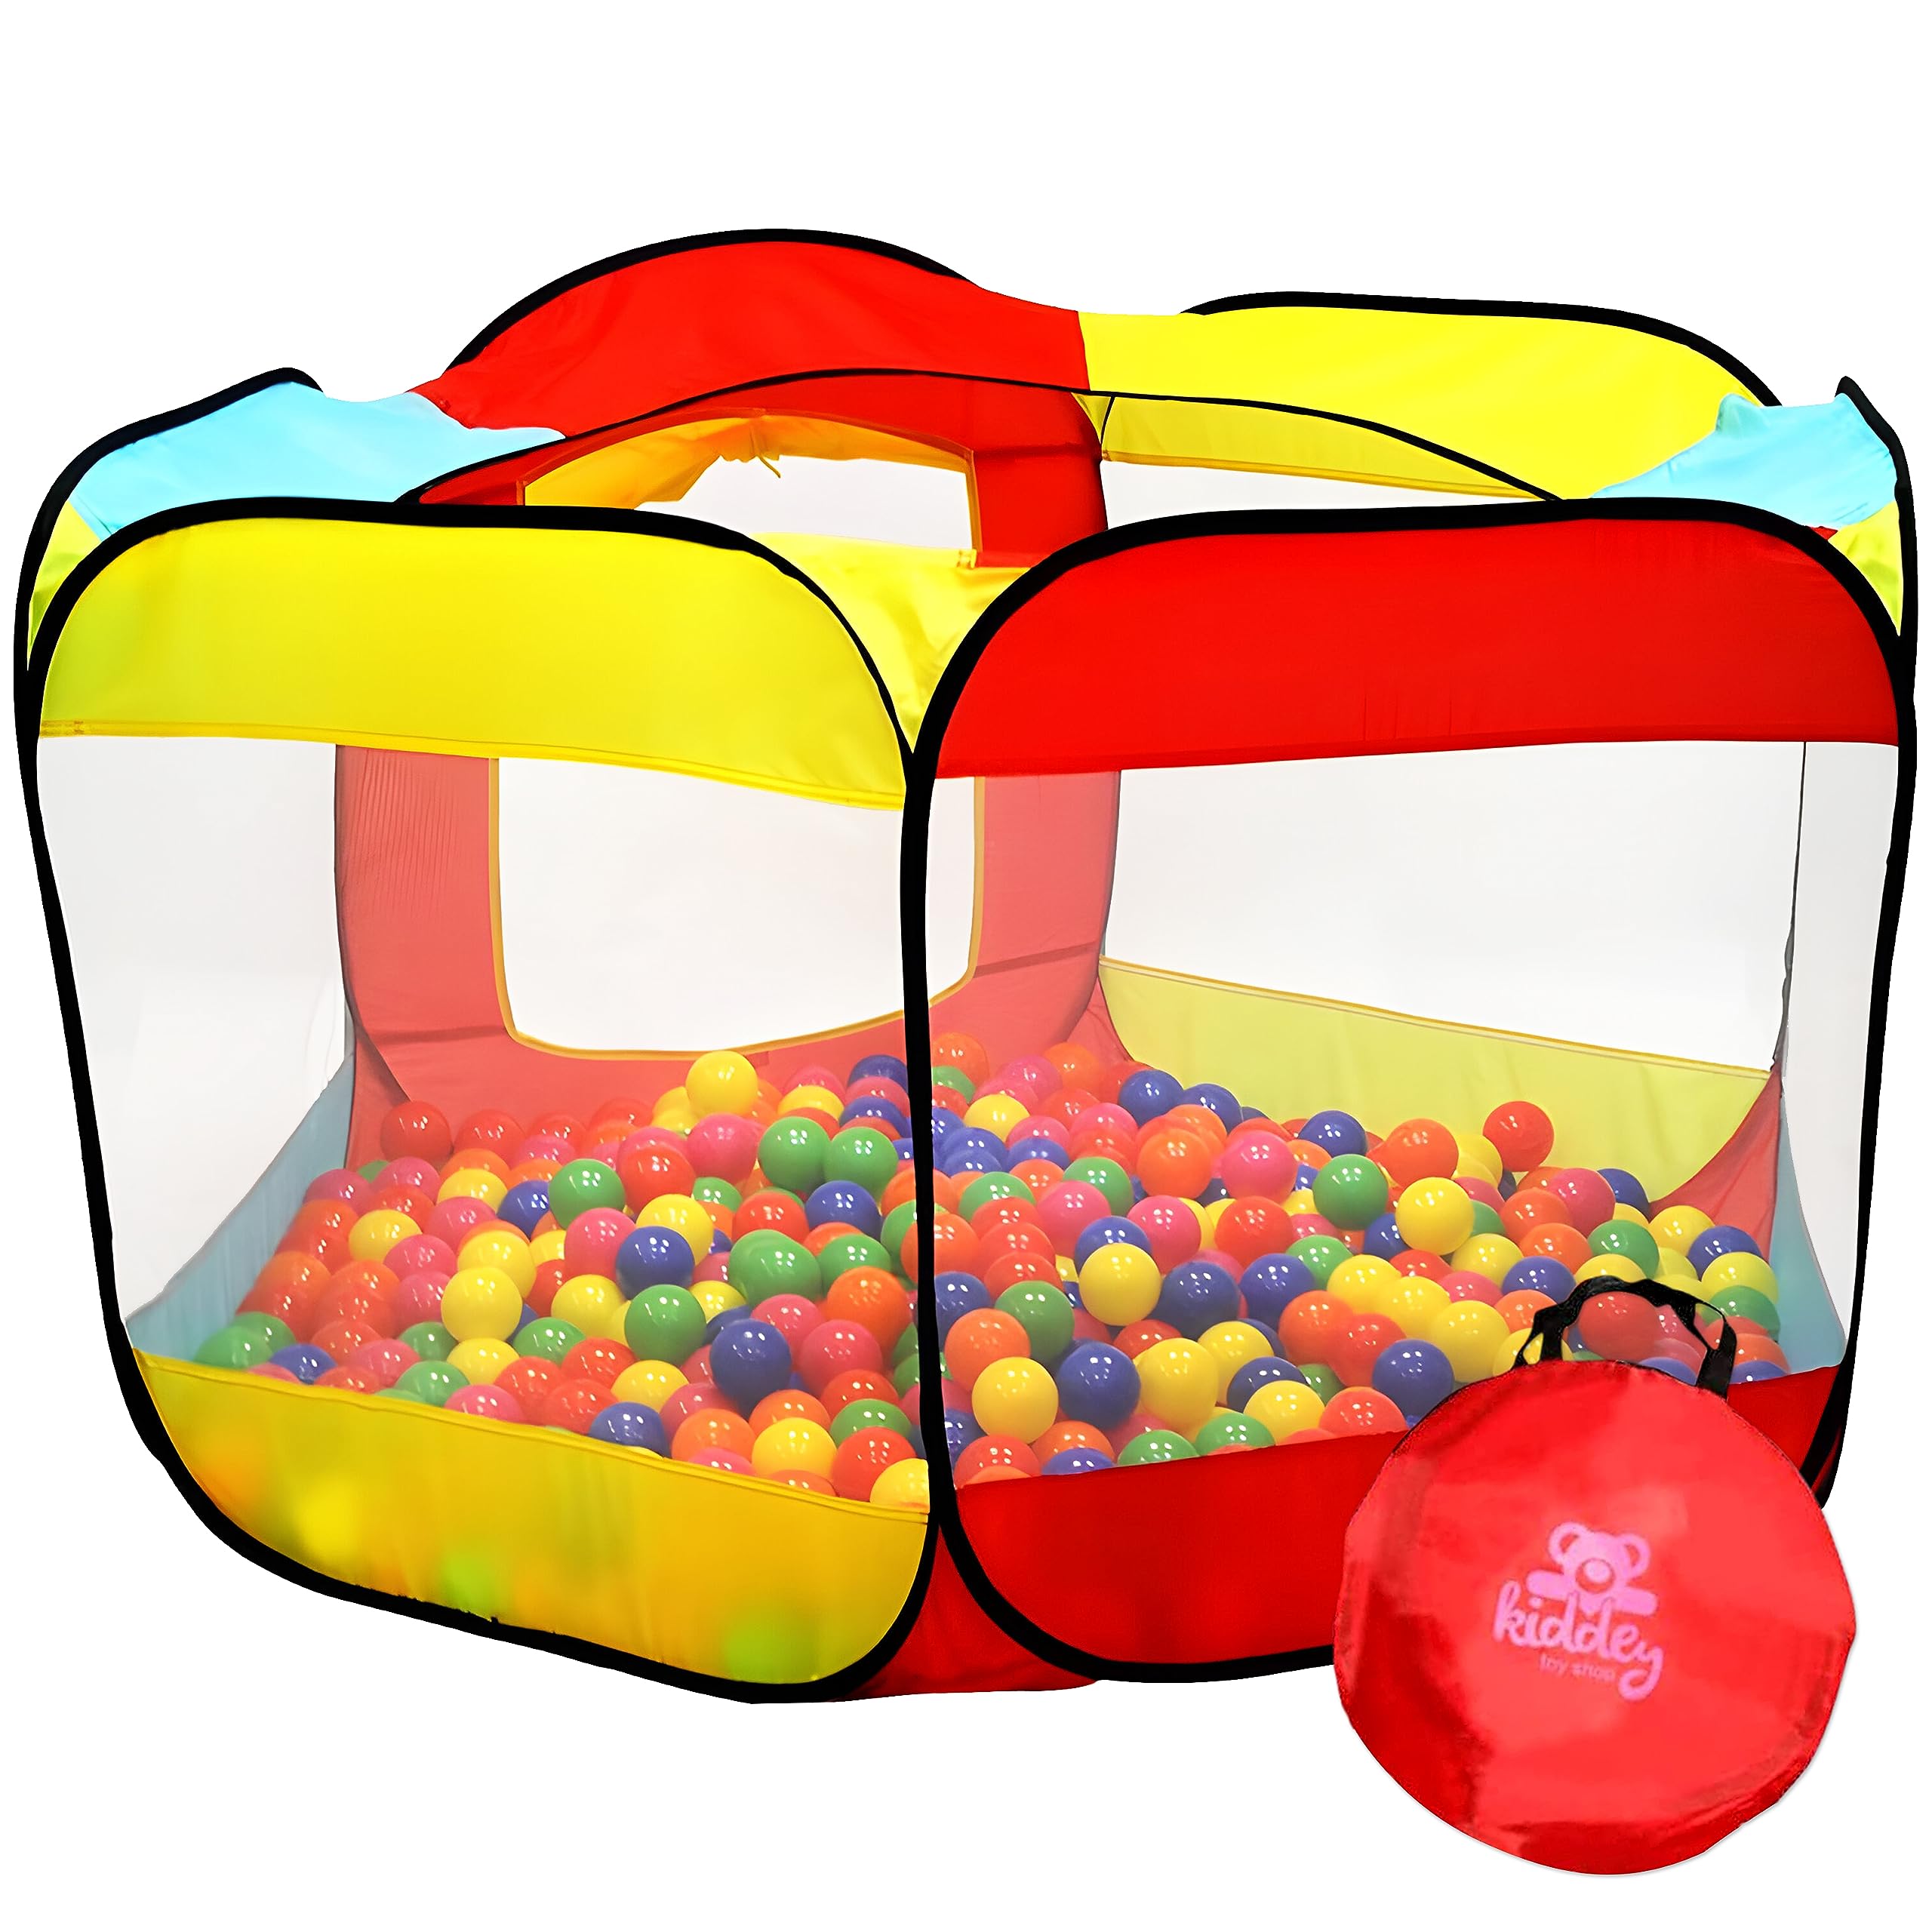 Kiddey Ball Pit Play Tent for Kids  Fun Ball Pits for Children Toddlers and Babies  Fill Playhouse with Plastic Balls Idea